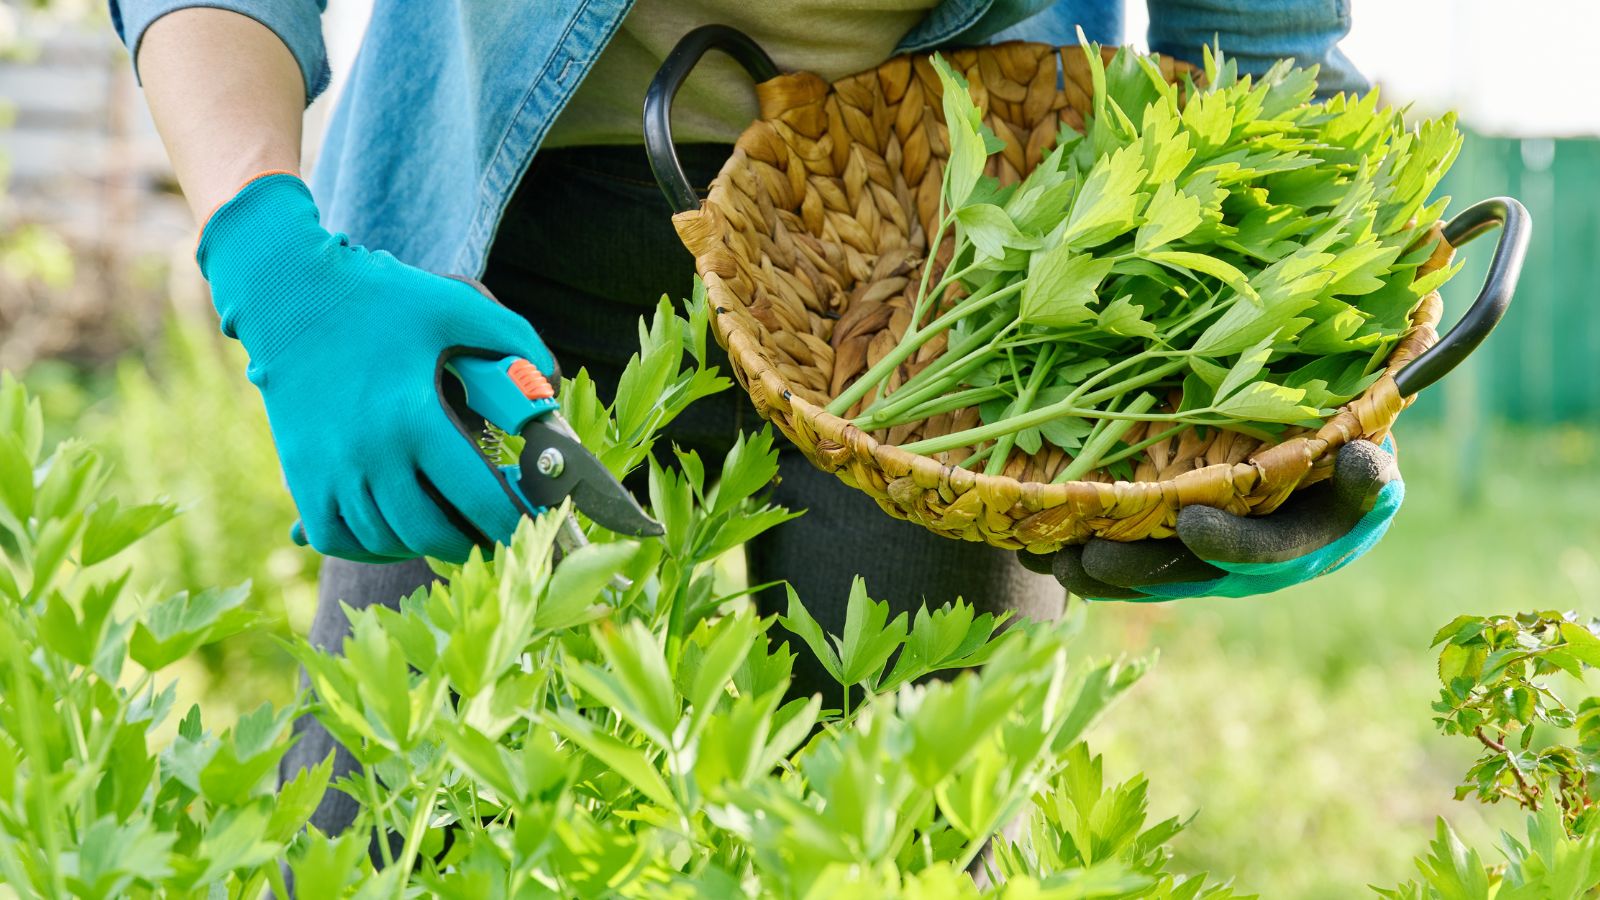 Woman harvesting fresh lovage and putting it into a basket.